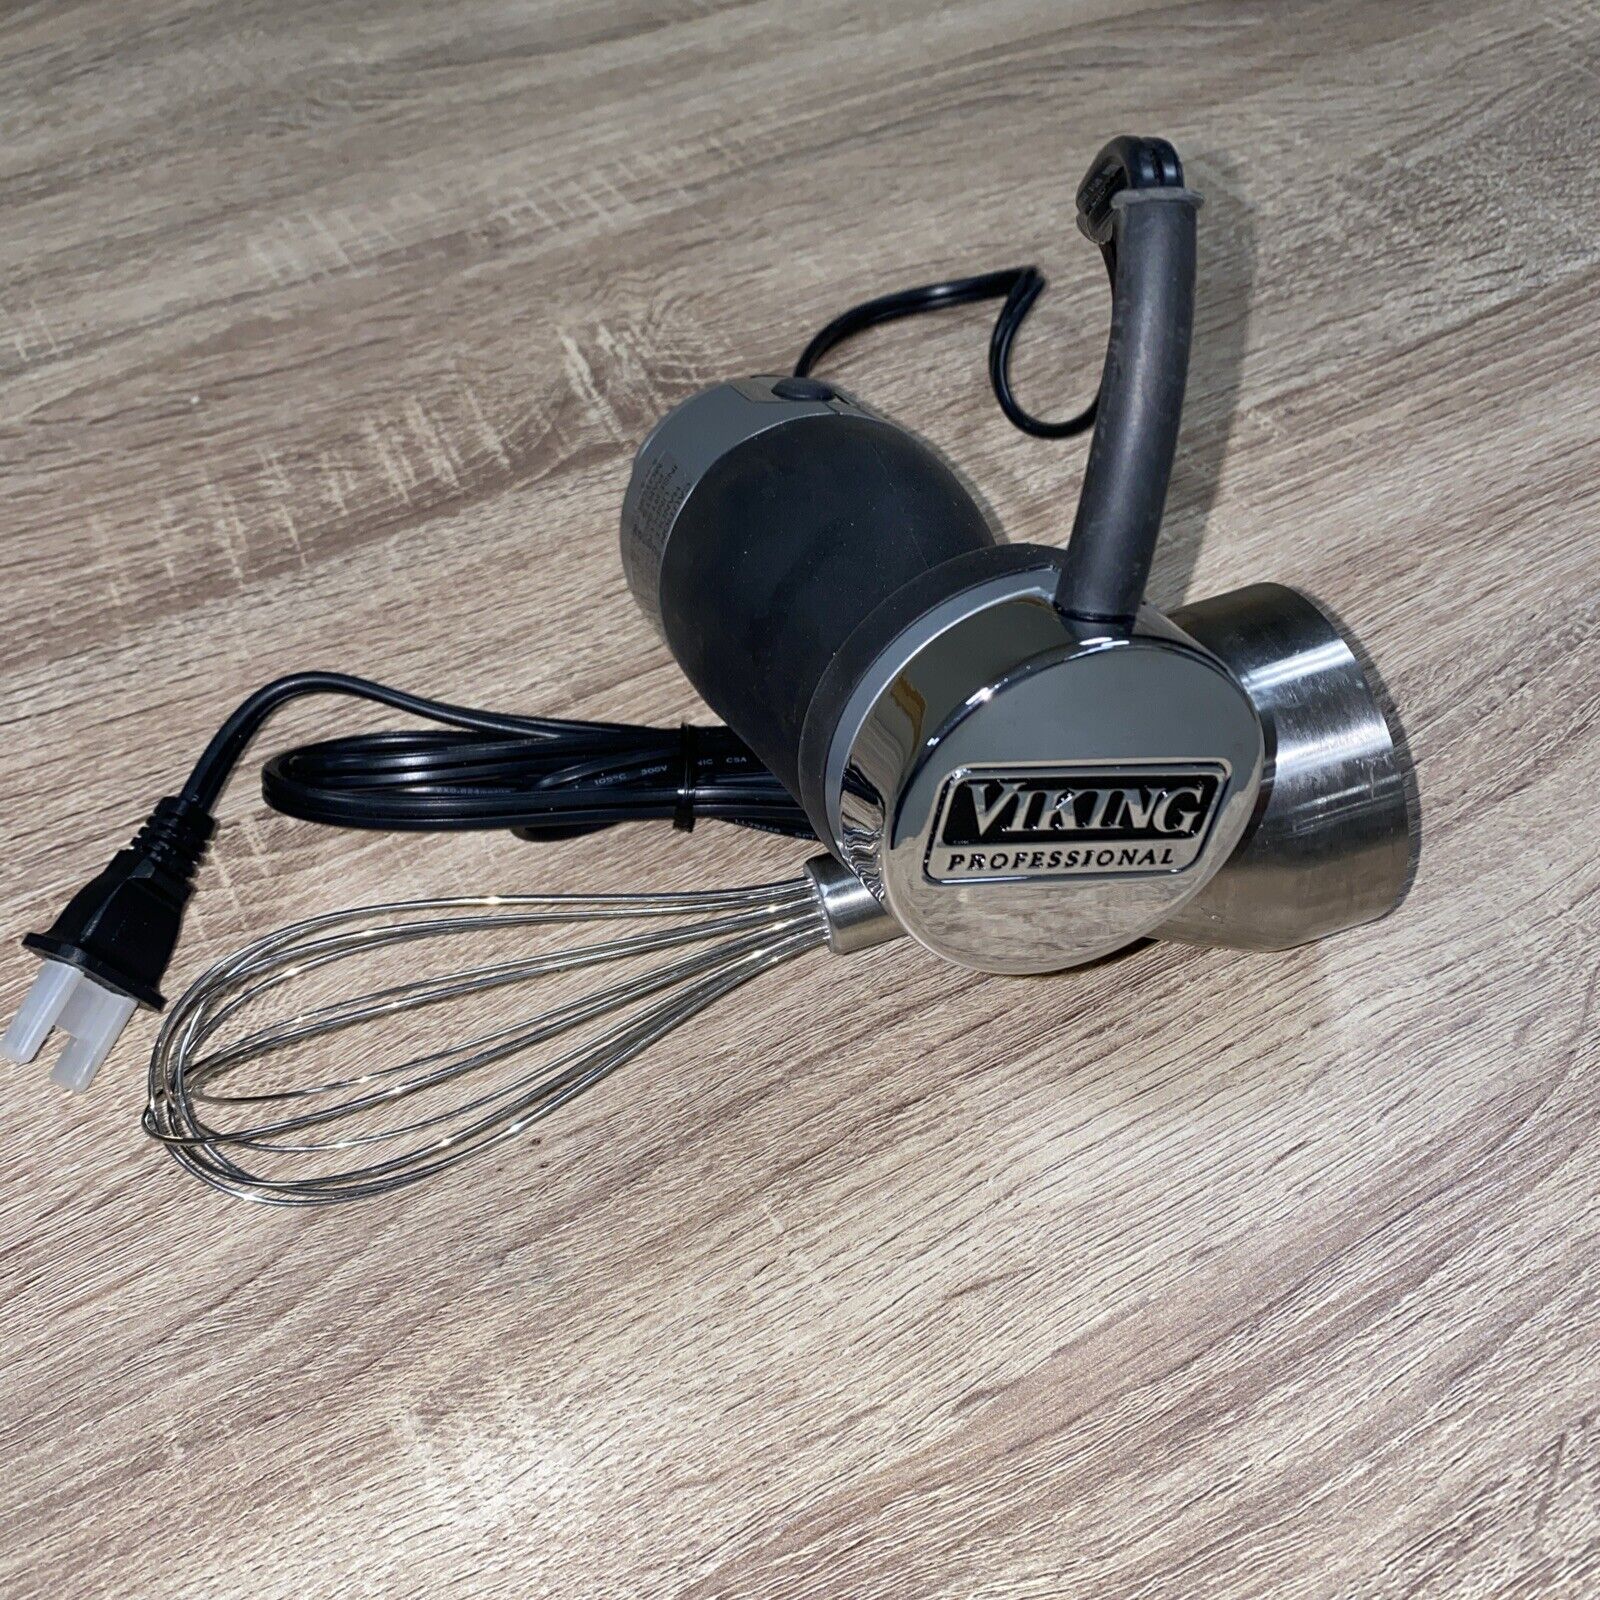 VIKING Professional Hand Held Mixer Blender Model VHB300 SG with One Attachment